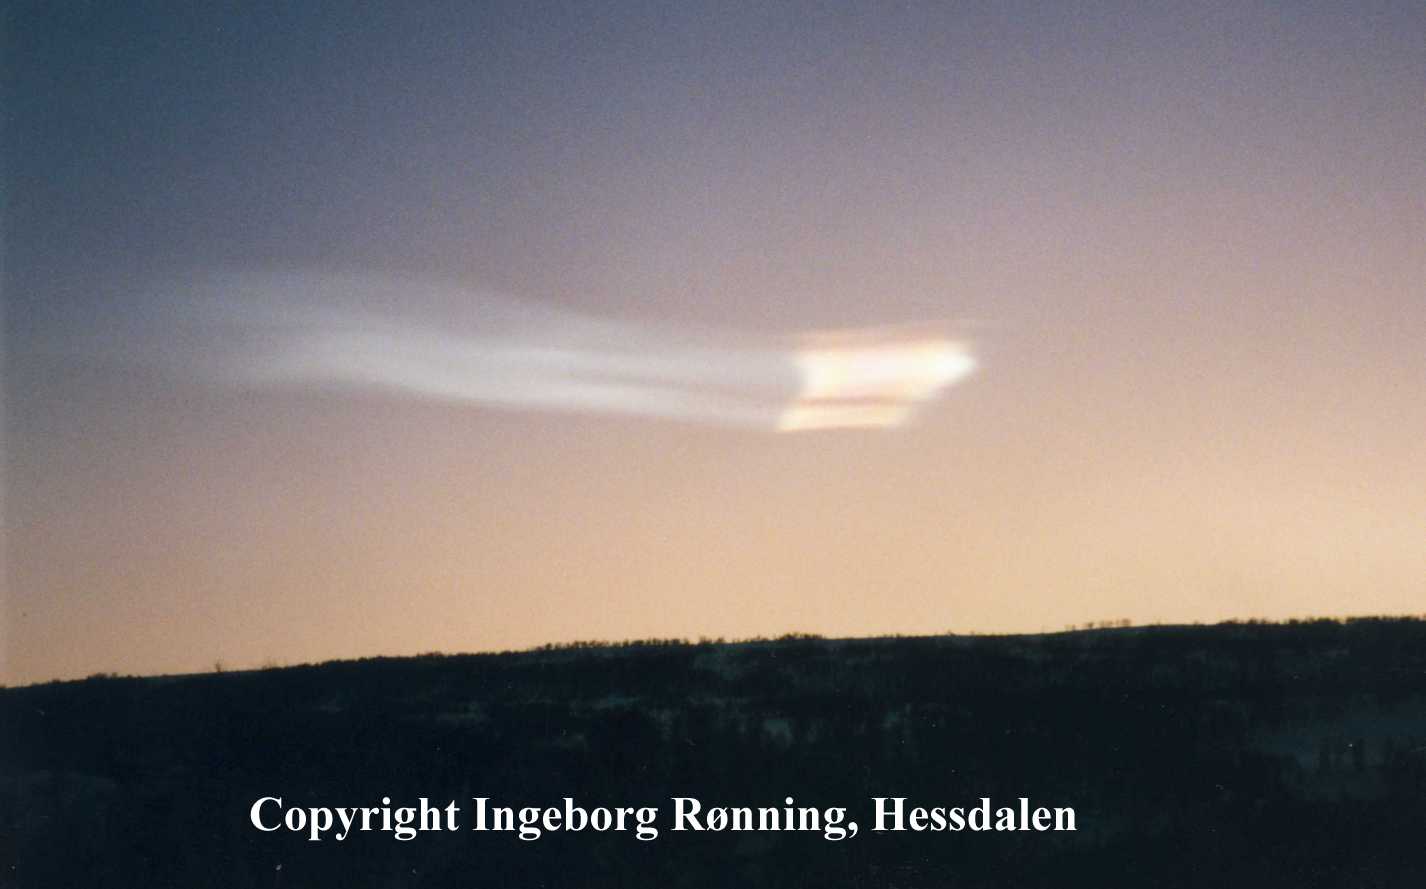 Picture no.3 of a cloud in Hessdalen (big verson)